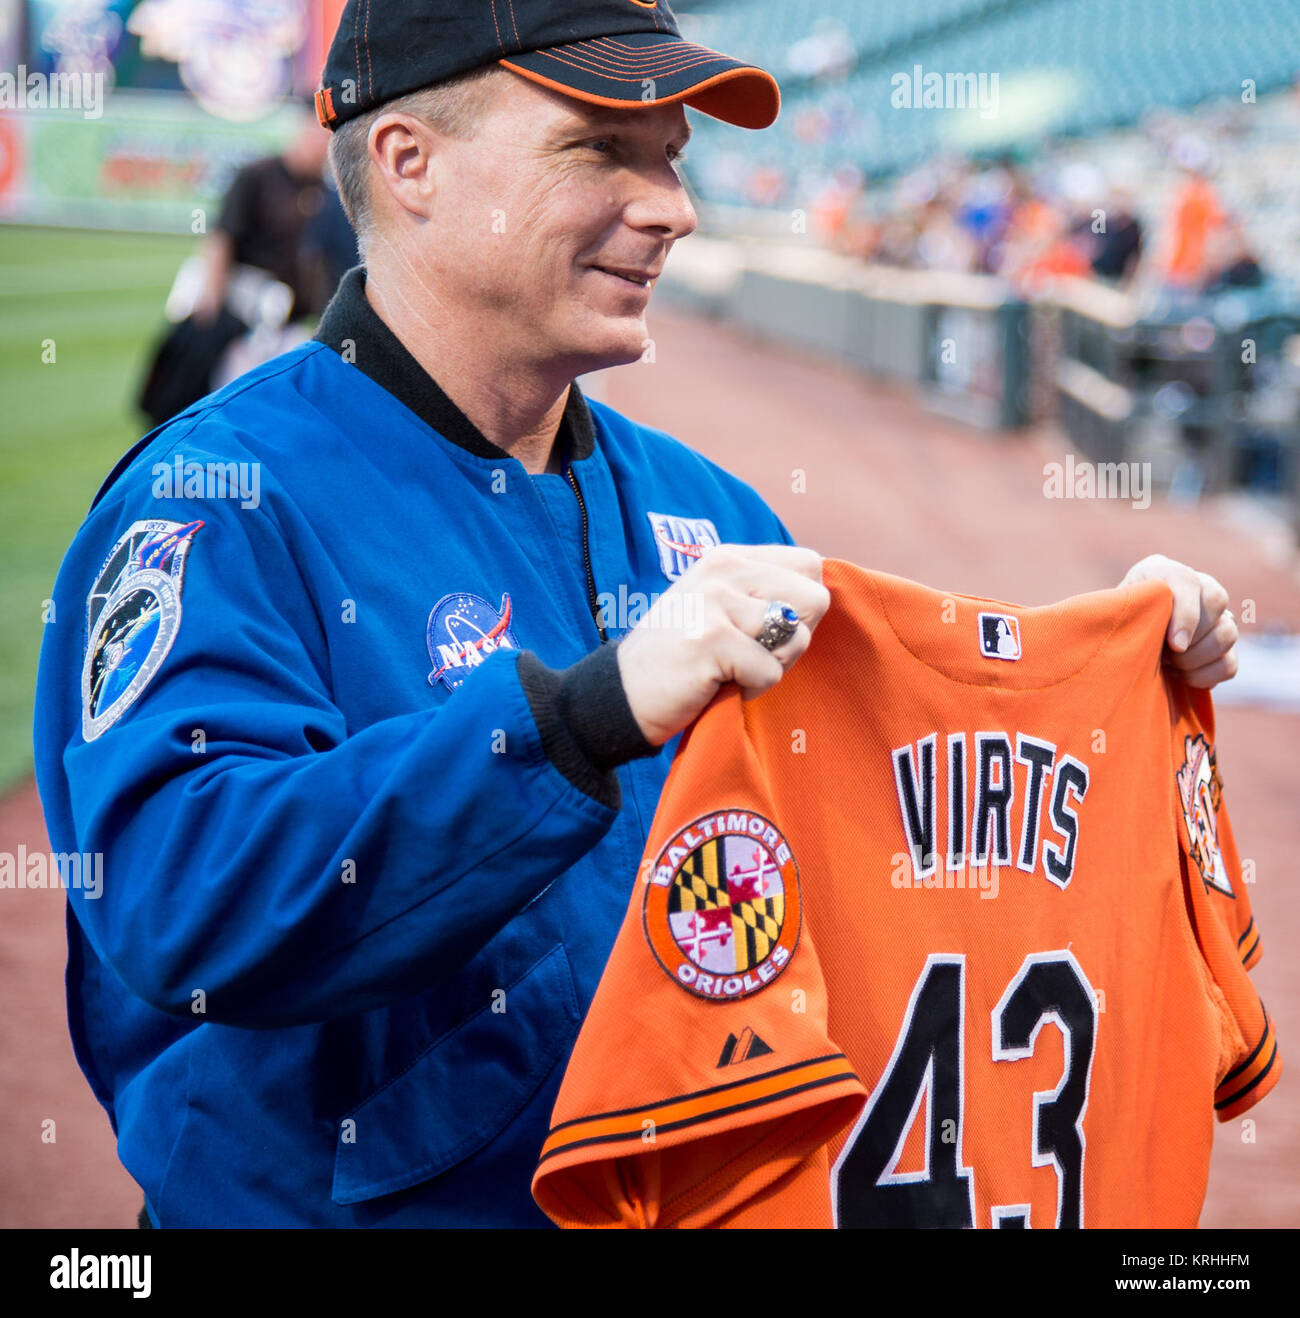 NASA astronaut and Maryland native, Terry Virts holds the jersey that he flew aboard the International Space Station before presenting it to Baltimore Orioles manager Buck Showalter prior to the Boston Red Sox takeing on the Baltimore Orioles at Camden Yards in Baltimore, Md. on Monday, September 14, 2015.  Virts spend 199 days aboard the International Space Station from November 2014 to June 2015 as part of Expeditions 42 and 43, serving as commander of Expedition 43.  Photo Credit: (NASA/Joel Kowsky) Astronaut Terry Virts Orioles First Pitch (NHQ201509140013) Stock Photo